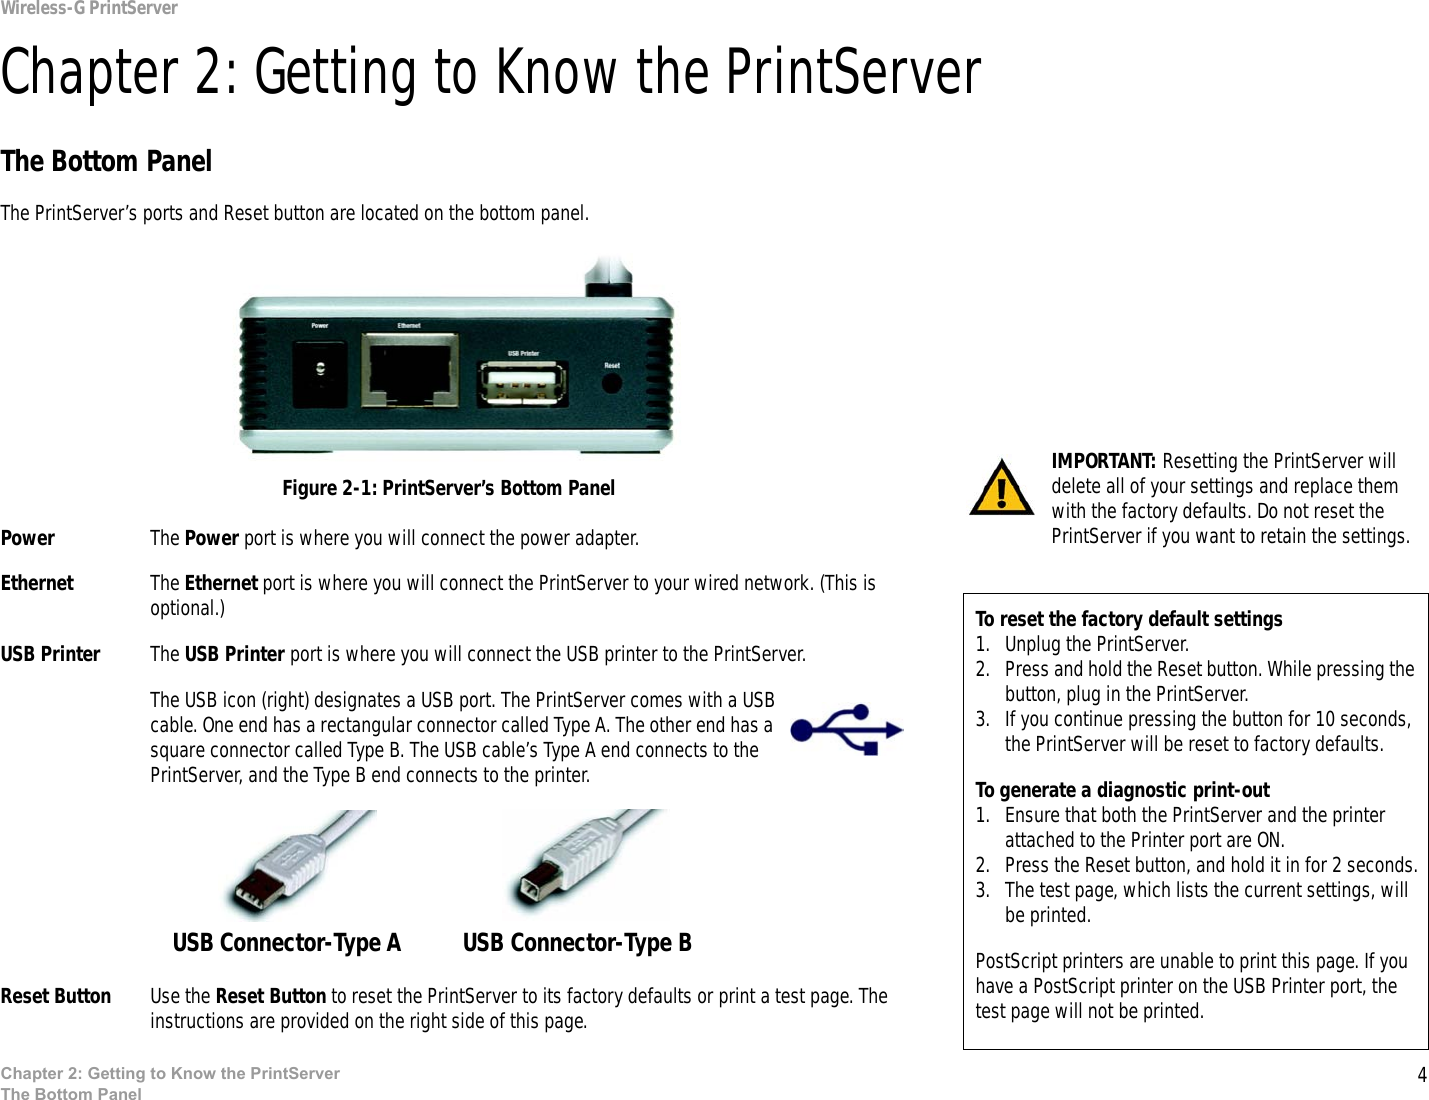 4Chapter 2: Getting to Know the PrintServerThe Bottom PanelWireless-G PrintServerChapter 2: Getting to Know the PrintServerThe Bottom PanelThe PrintServer’s ports and Reset button are located on the bottom panel.Power The Power port is where you will connect the power adapter.Ethernet The Ethernet port is where you will connect the PrintServer to your wired network. (This is optional.)USB Printer The USB Printer port is where you will connect the USB printer to the PrintServer.The USB icon (right) designates a USB port. The PrintServer comes with a USB cable. One end has a rectangular connector called Type A. The other end has a square connector called Type B. The USB cable’s Type A end connects to the PrintServer, and the Type B end connects to the printer. Reset Button Use the Reset Button to reset the PrintServer to its factory defaults or print a test page. The instructions are provided on the right side of this page.IMPORTANT: Resetting the PrintServer will delete all of your settings and replace them with the factory defaults. Do not reset the PrintServer if you want to retain the settings.Figure 2-1: PrintServer’s Bottom PanelTo reset the factory default settings1. Unplug the PrintServer.2. Press and hold the Reset button. While pressing the button, plug in the PrintServer.3. If you continue pressing the button for 10 seconds, the PrintServer will be reset to factory defaults.To generate a diagnostic print-out1. Ensure that both the PrintServer and the printer attached to the Printer port are ON.2. Press the Reset button, and hold it in for 2 seconds.3. The test page, which lists the current settings, will be printed. PostScript printers are unable to print this page. If you have a PostScript printer on the USB Printer port, the test page will not be printed.USB Connector-Type A  USB Connector-Type B 